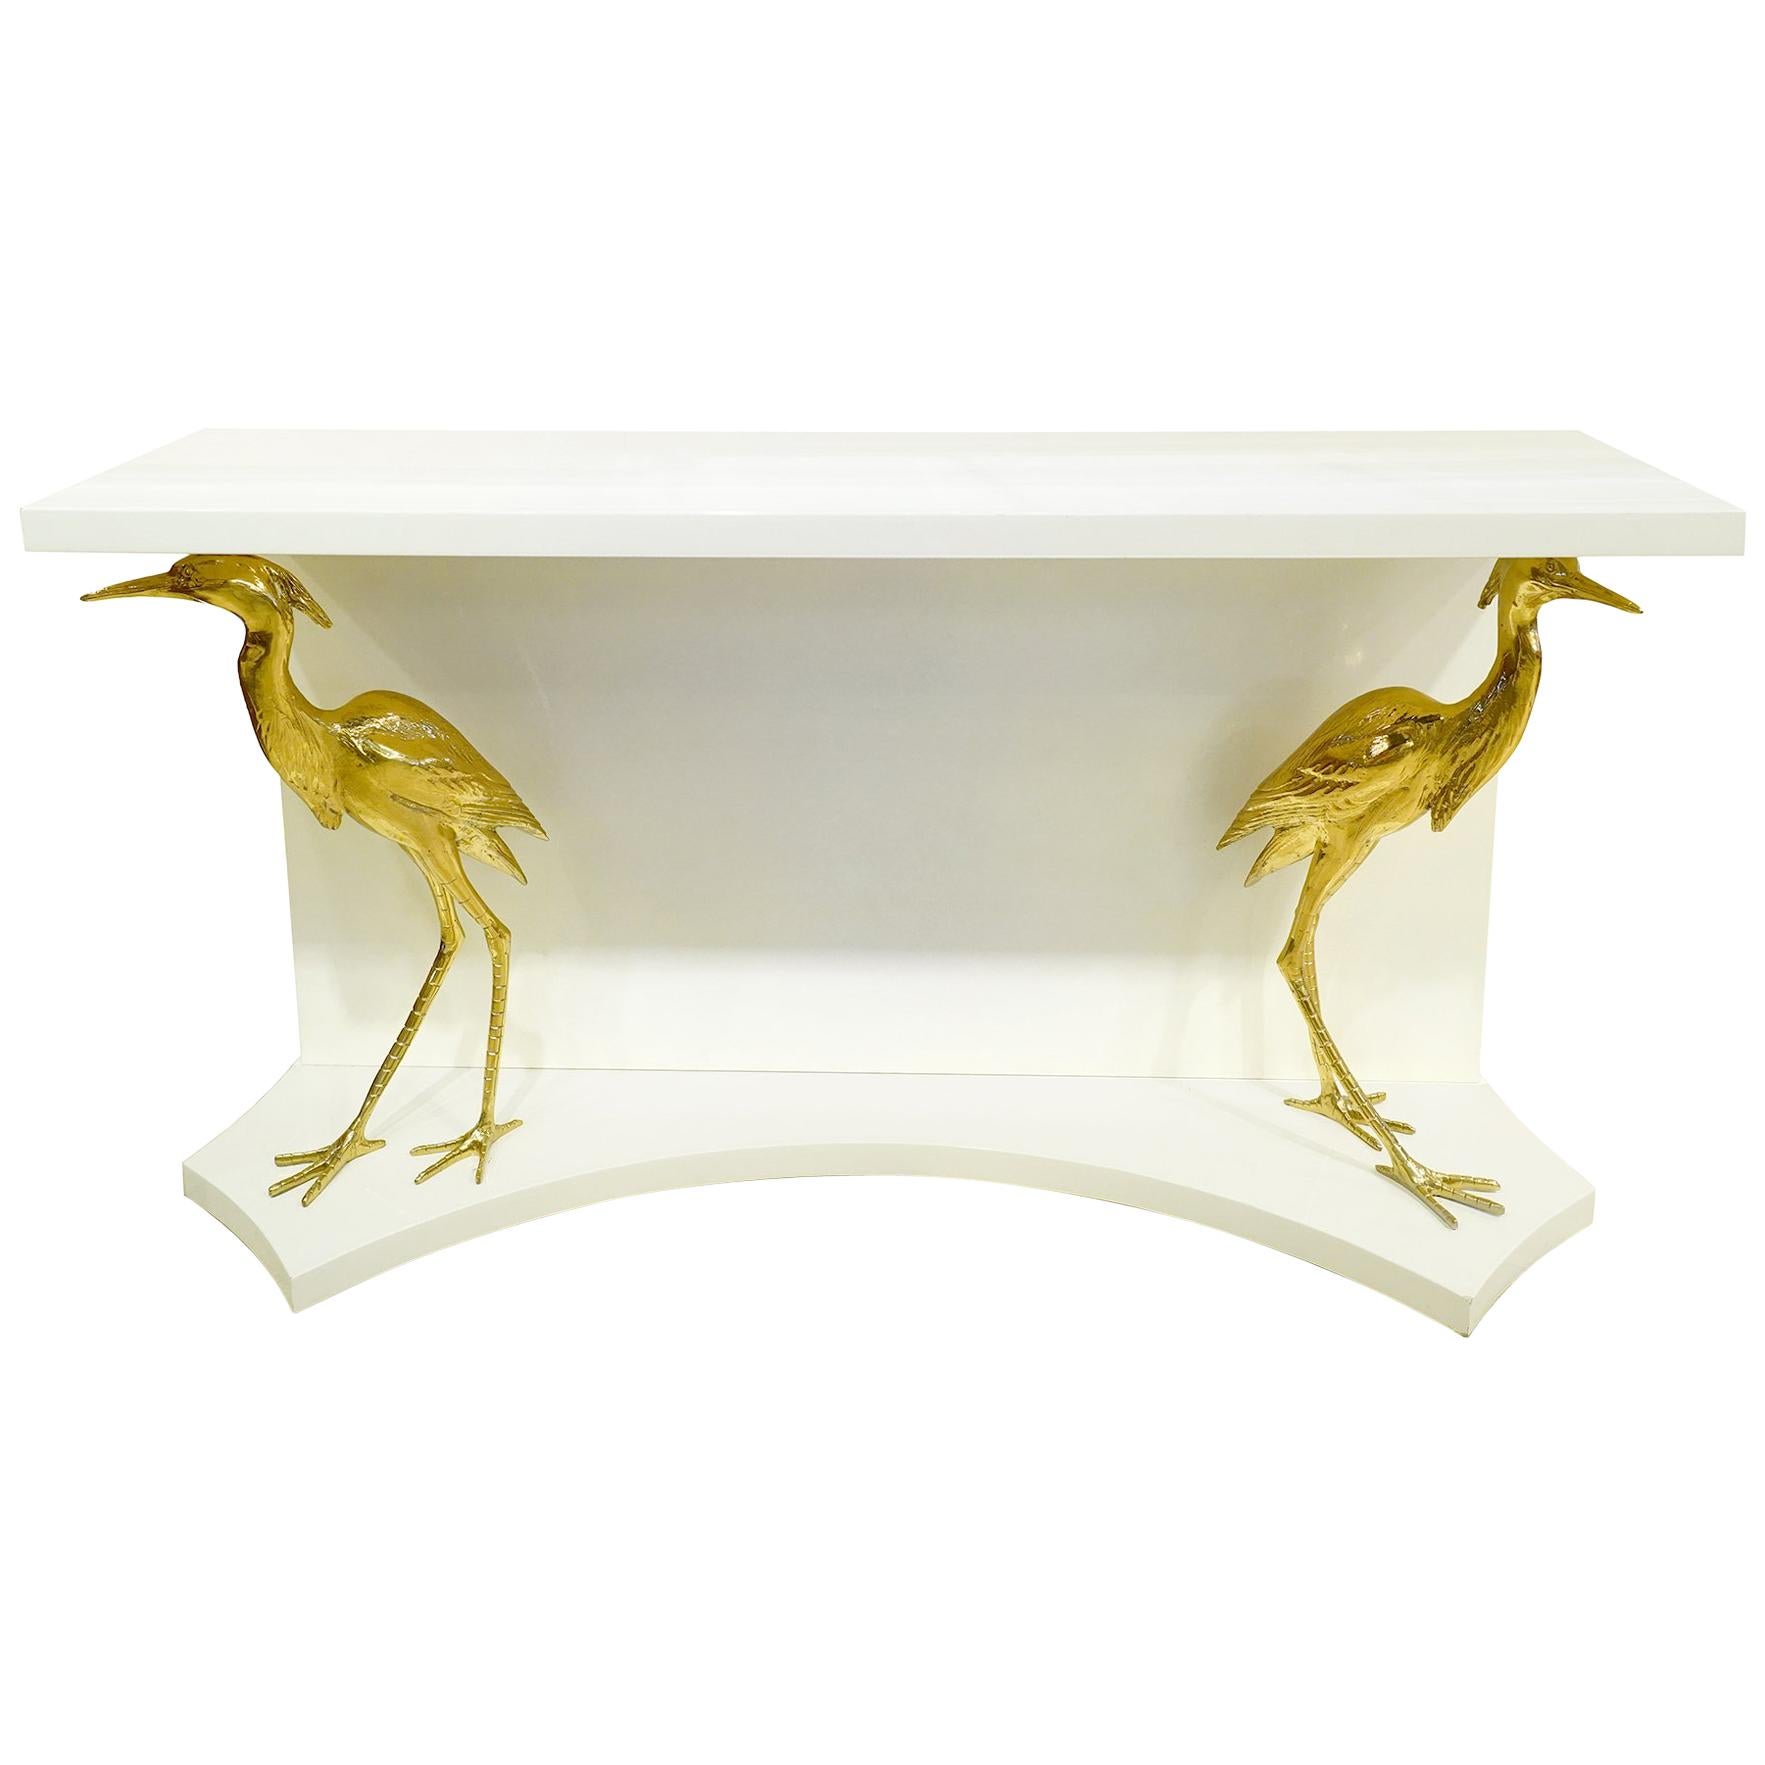 White Lacquer and Brass Egrets Console Table Manner of Jacques Duval-Brasseur